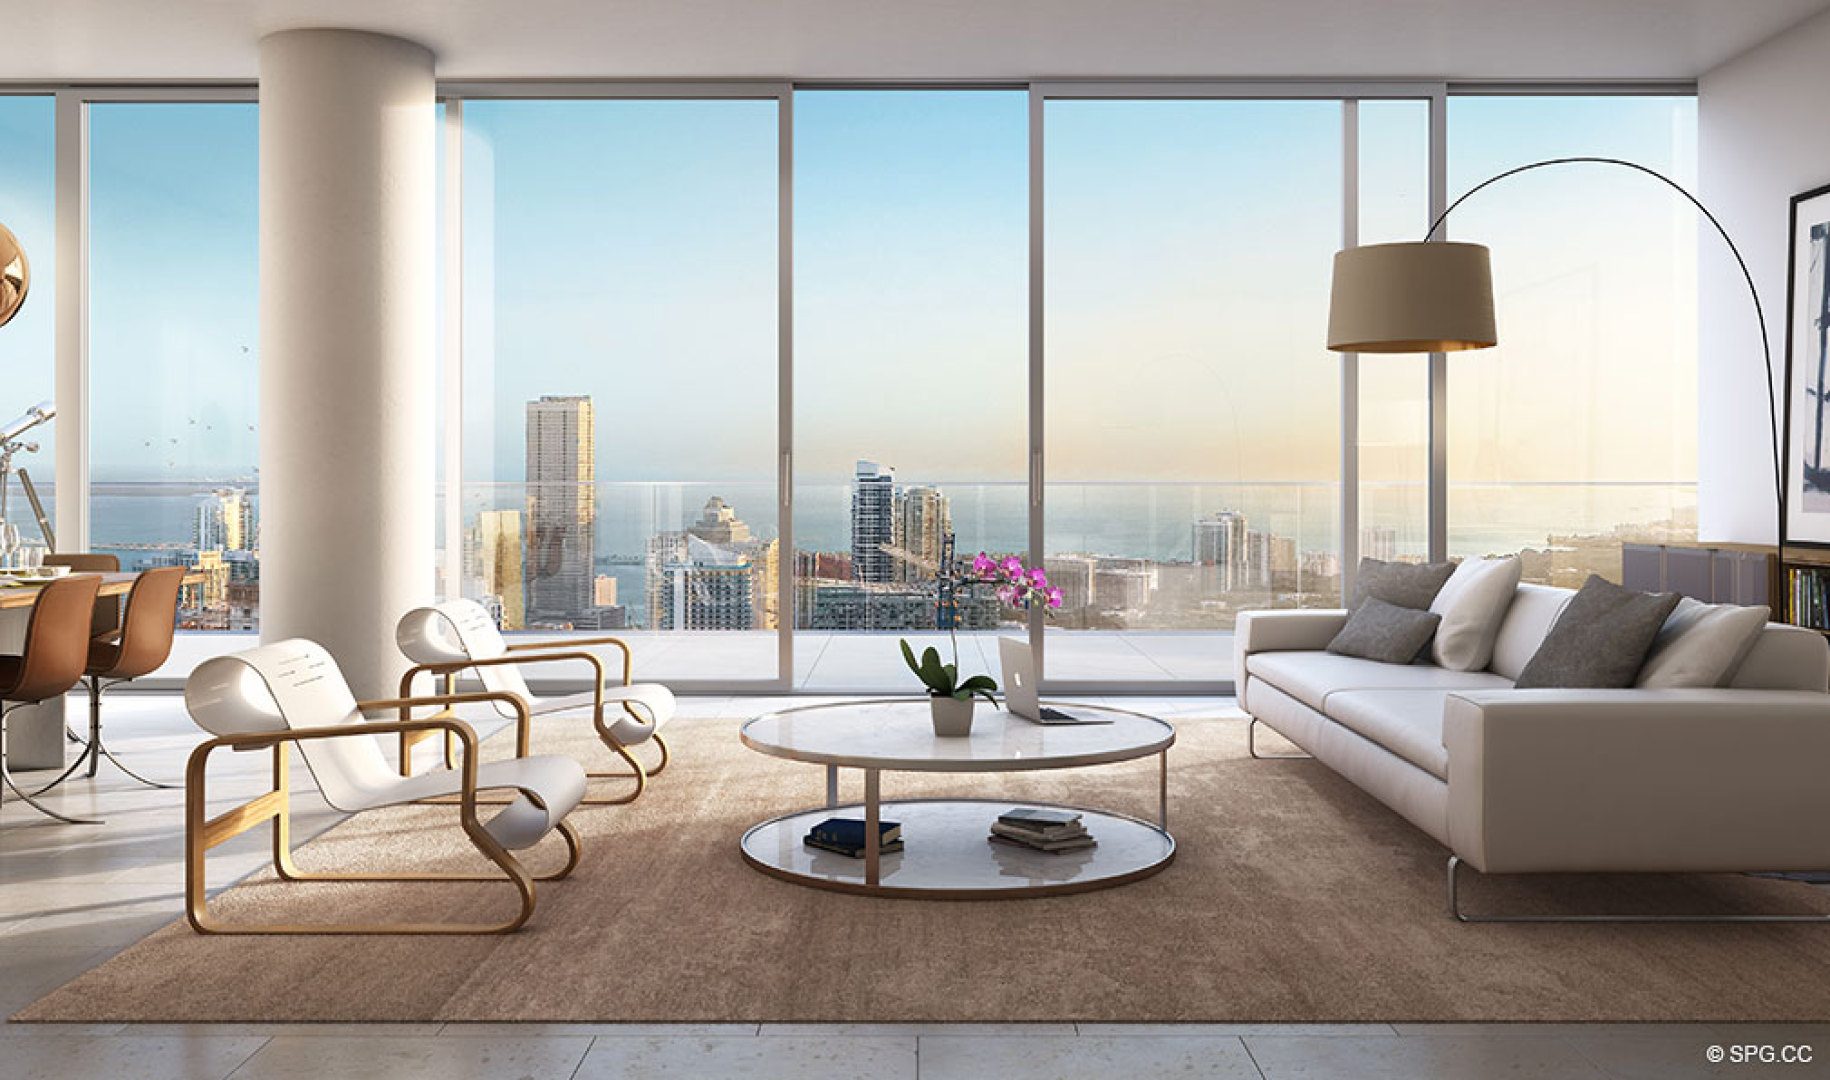 Living Room Layout in One River Point, Luxury Waterfront Condos in Miami, Florida 33130